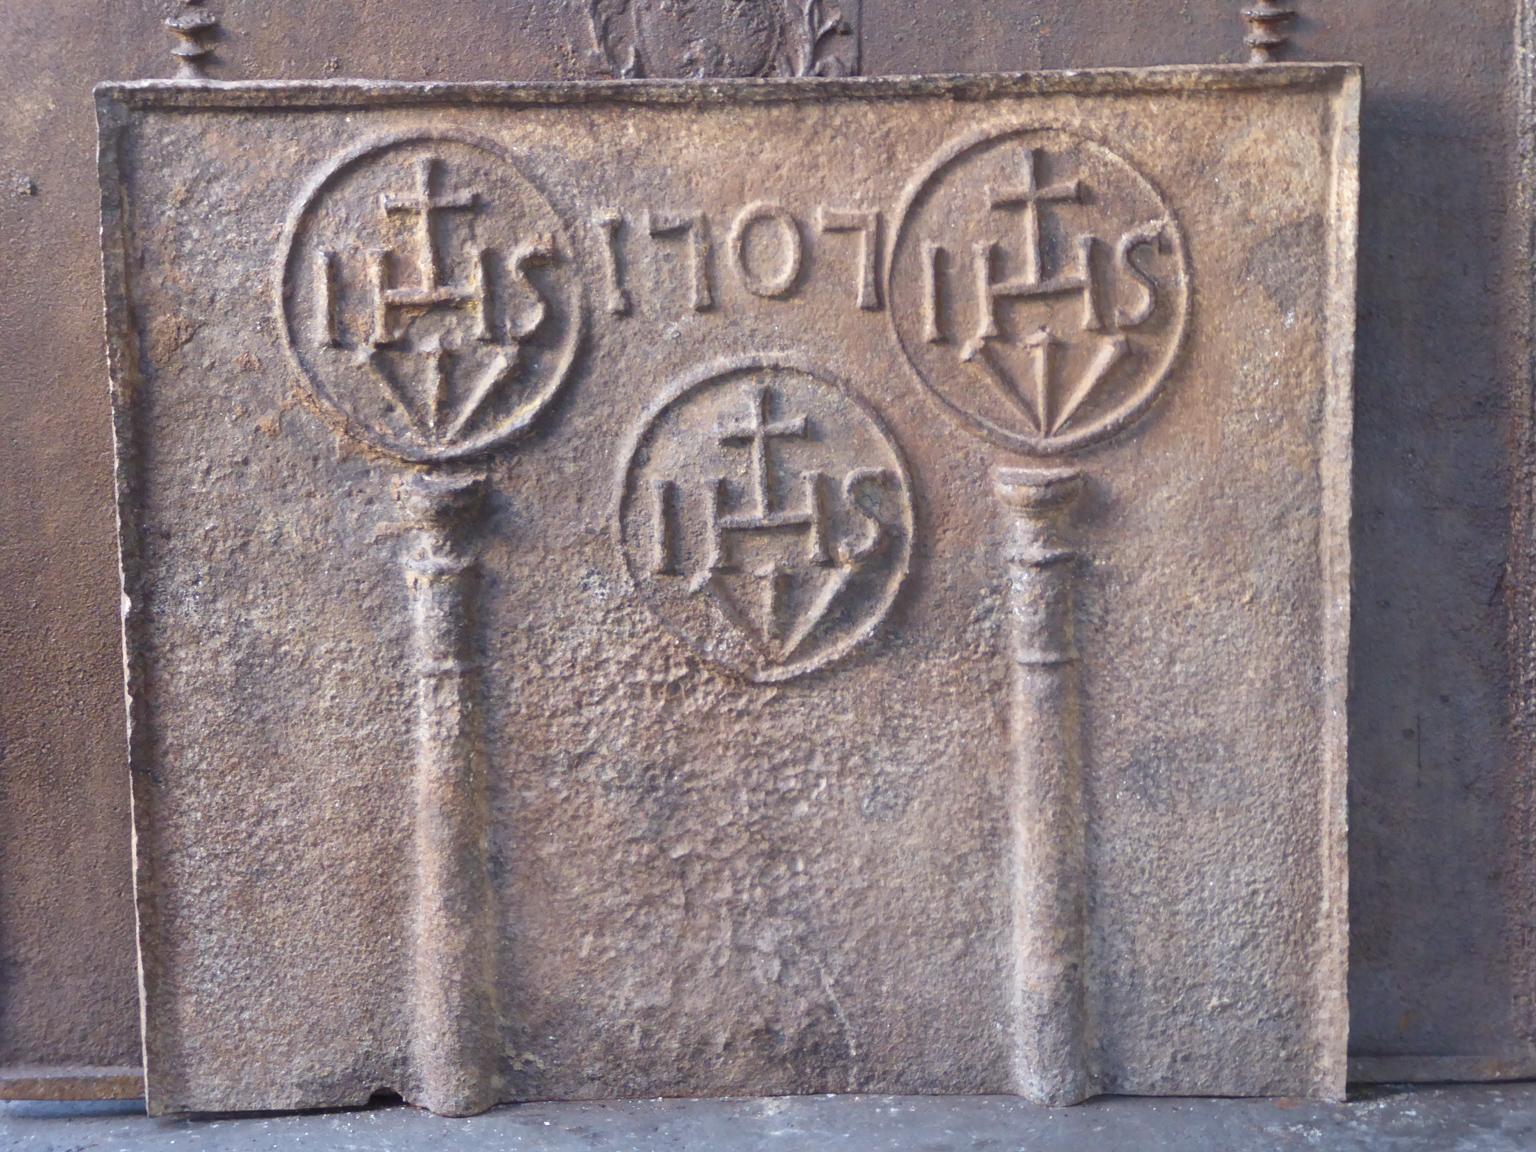 18th century Louis XIV French fireback with pillars, three IHS monograms, and the date of production 1707.

The monogram IHS stands for Iesus Hominum Salvator (Jesus the Savior of Humanity) or In Hoc Signo (In this sign will you win). The pillars